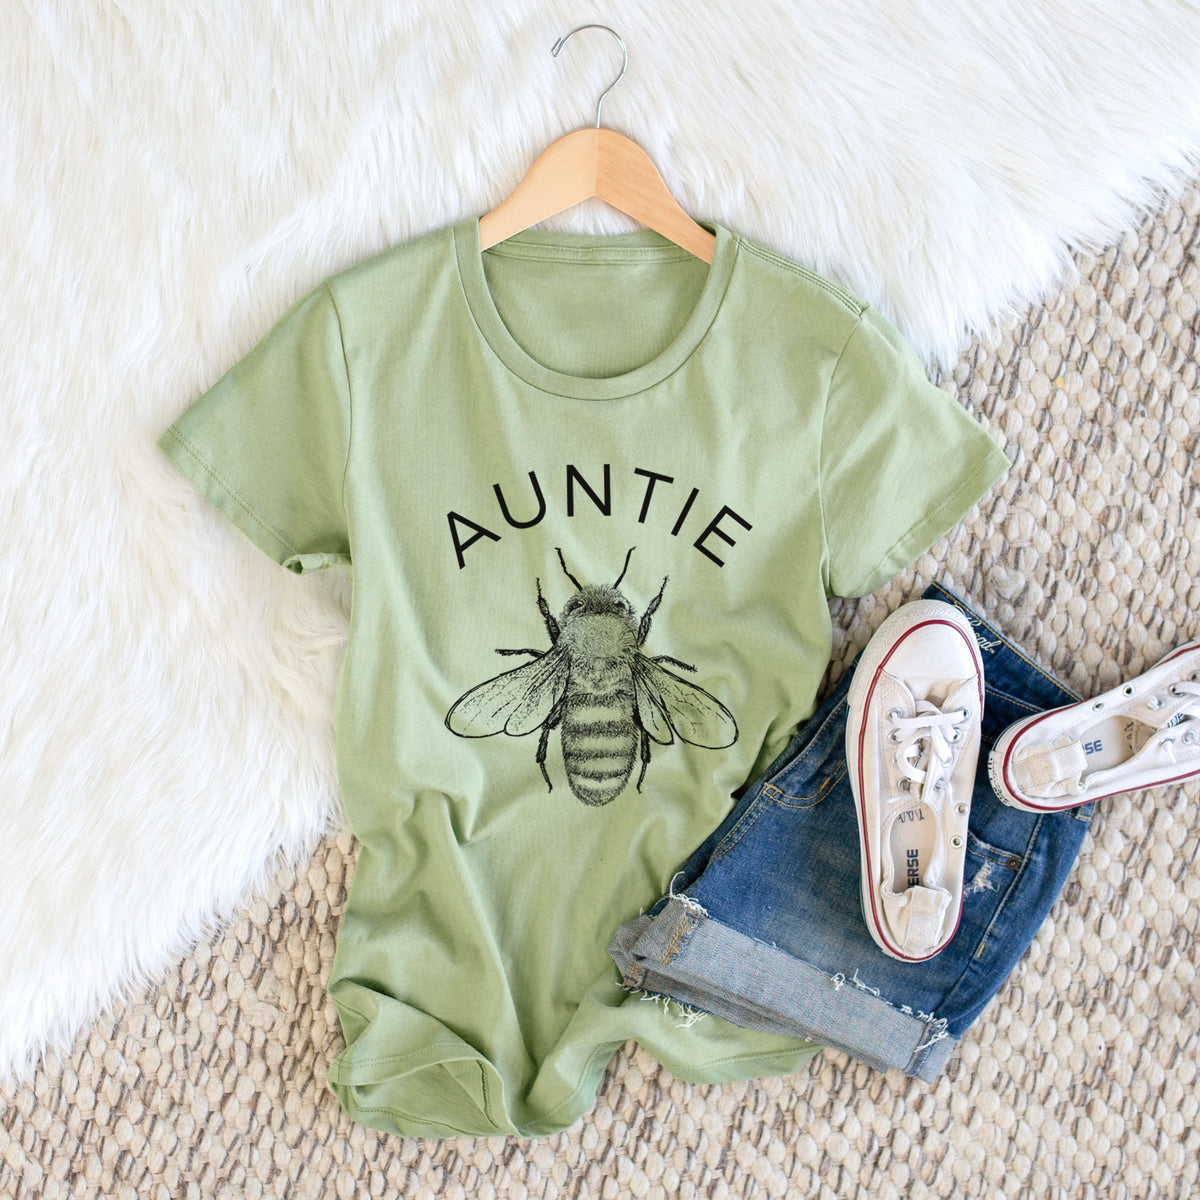 Auntie Bee - Women&#39;s Crewneck - Made in USA - 100% Organic Cotton